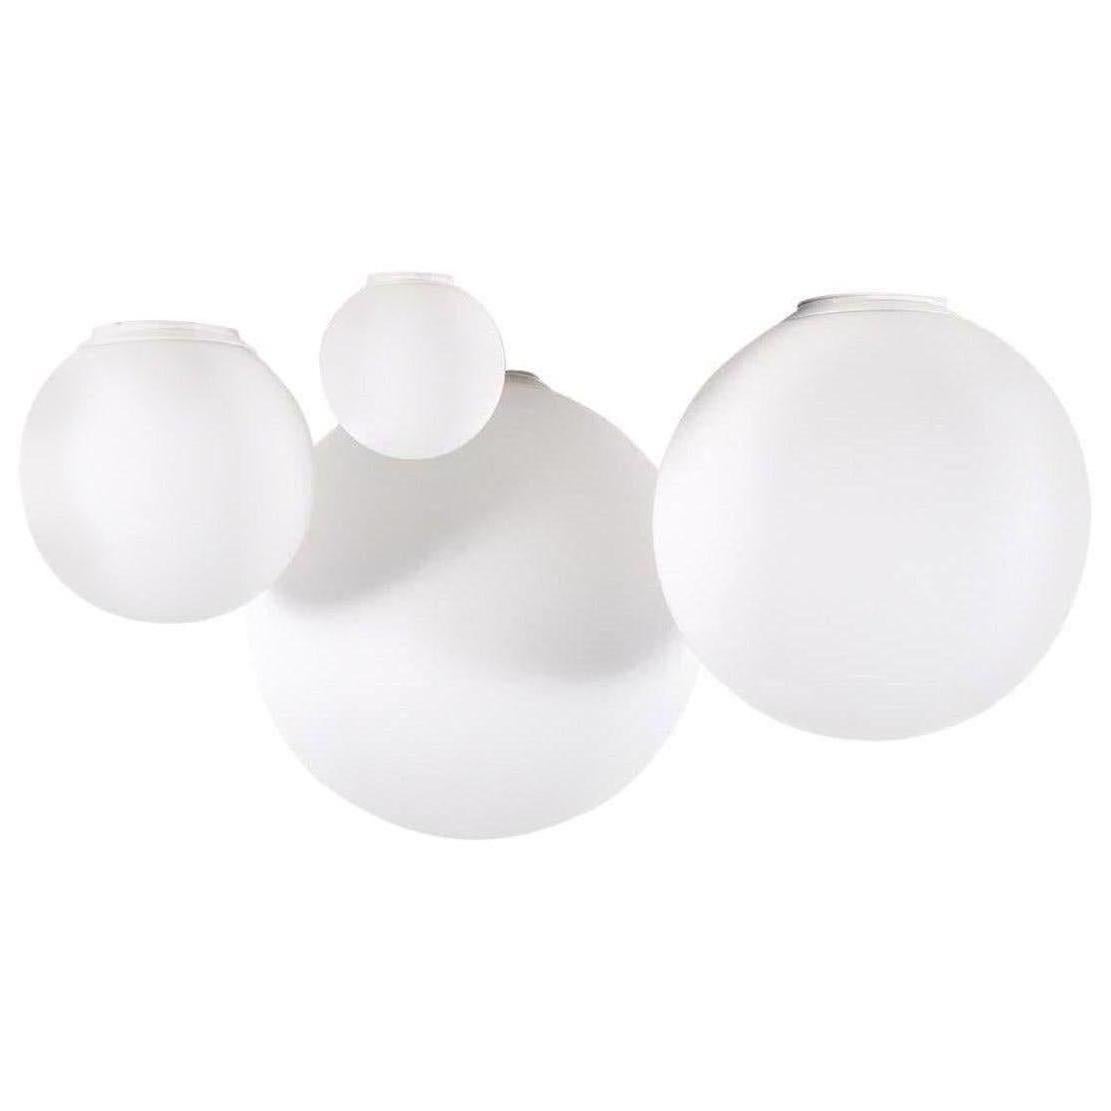 Extra Large Michele De Lucchi 'Dioscuri 42' Wall or Ceiling Light For Sale 7